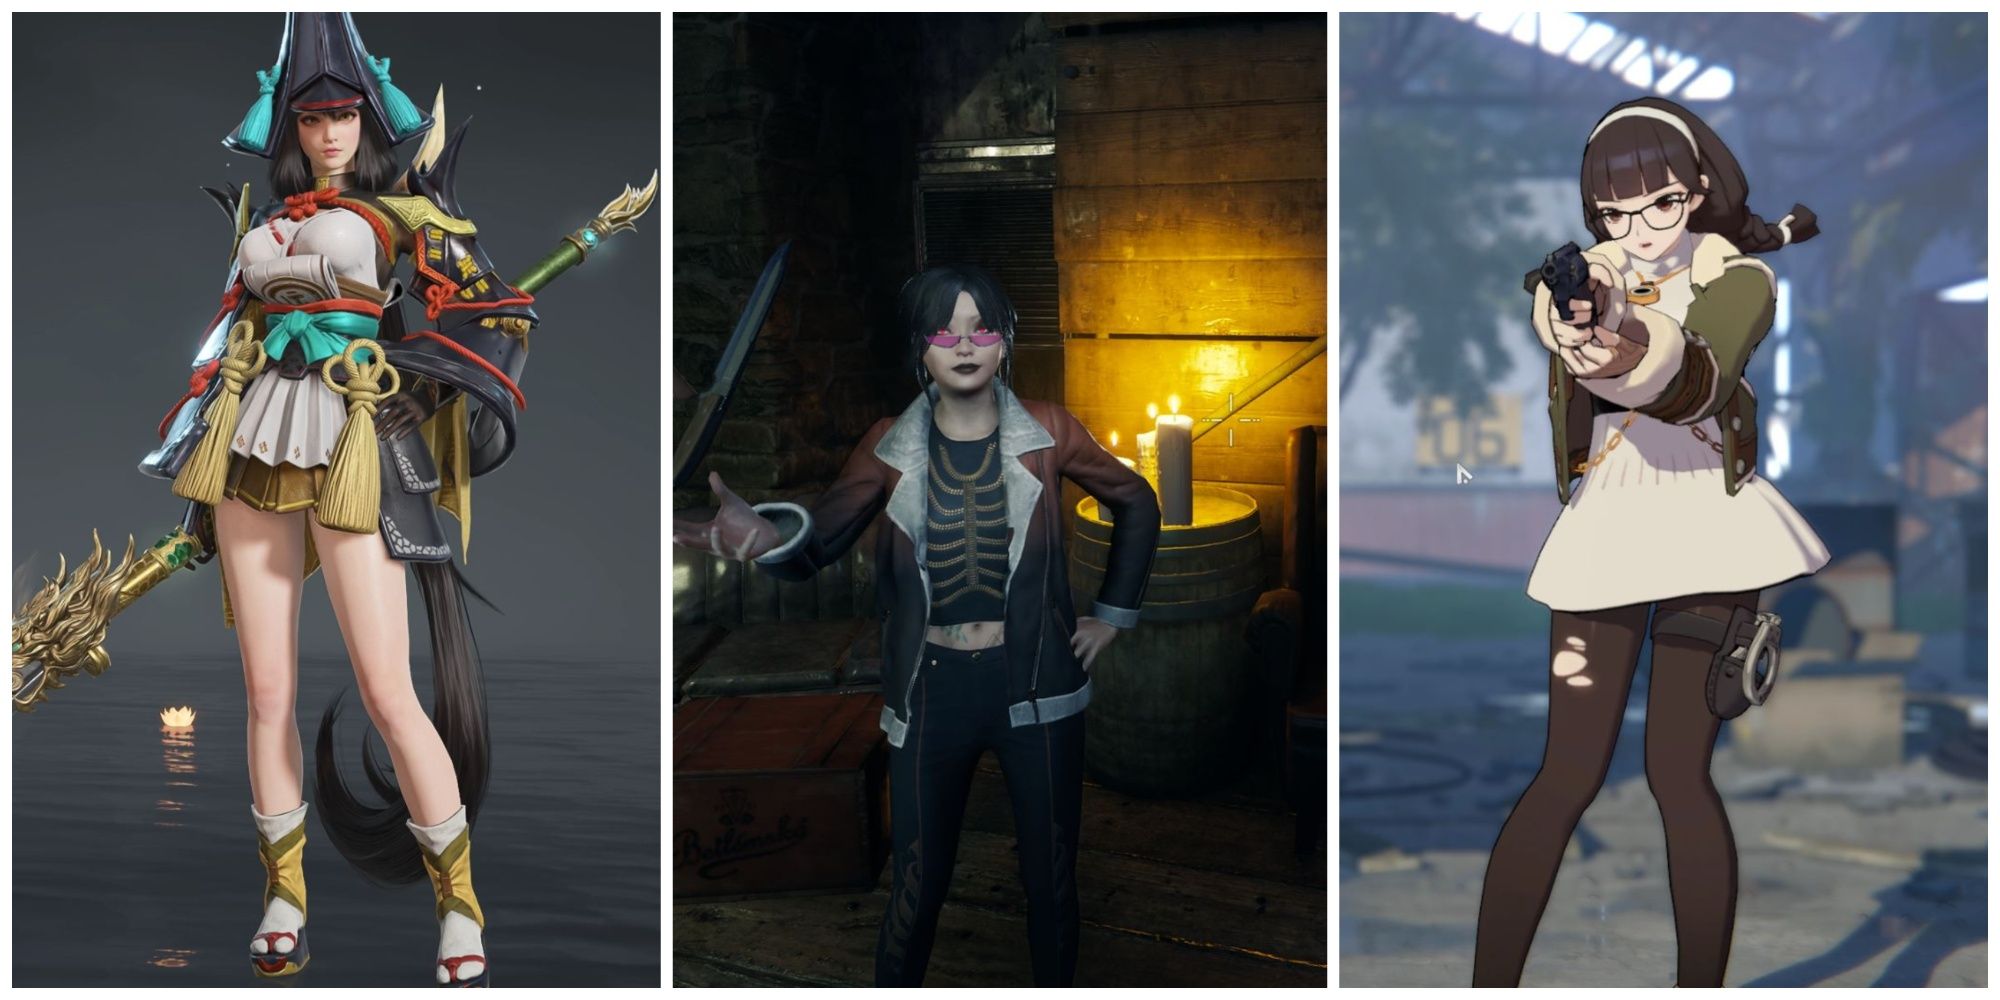 Unique Battle Royale Games 3 players character in a collage